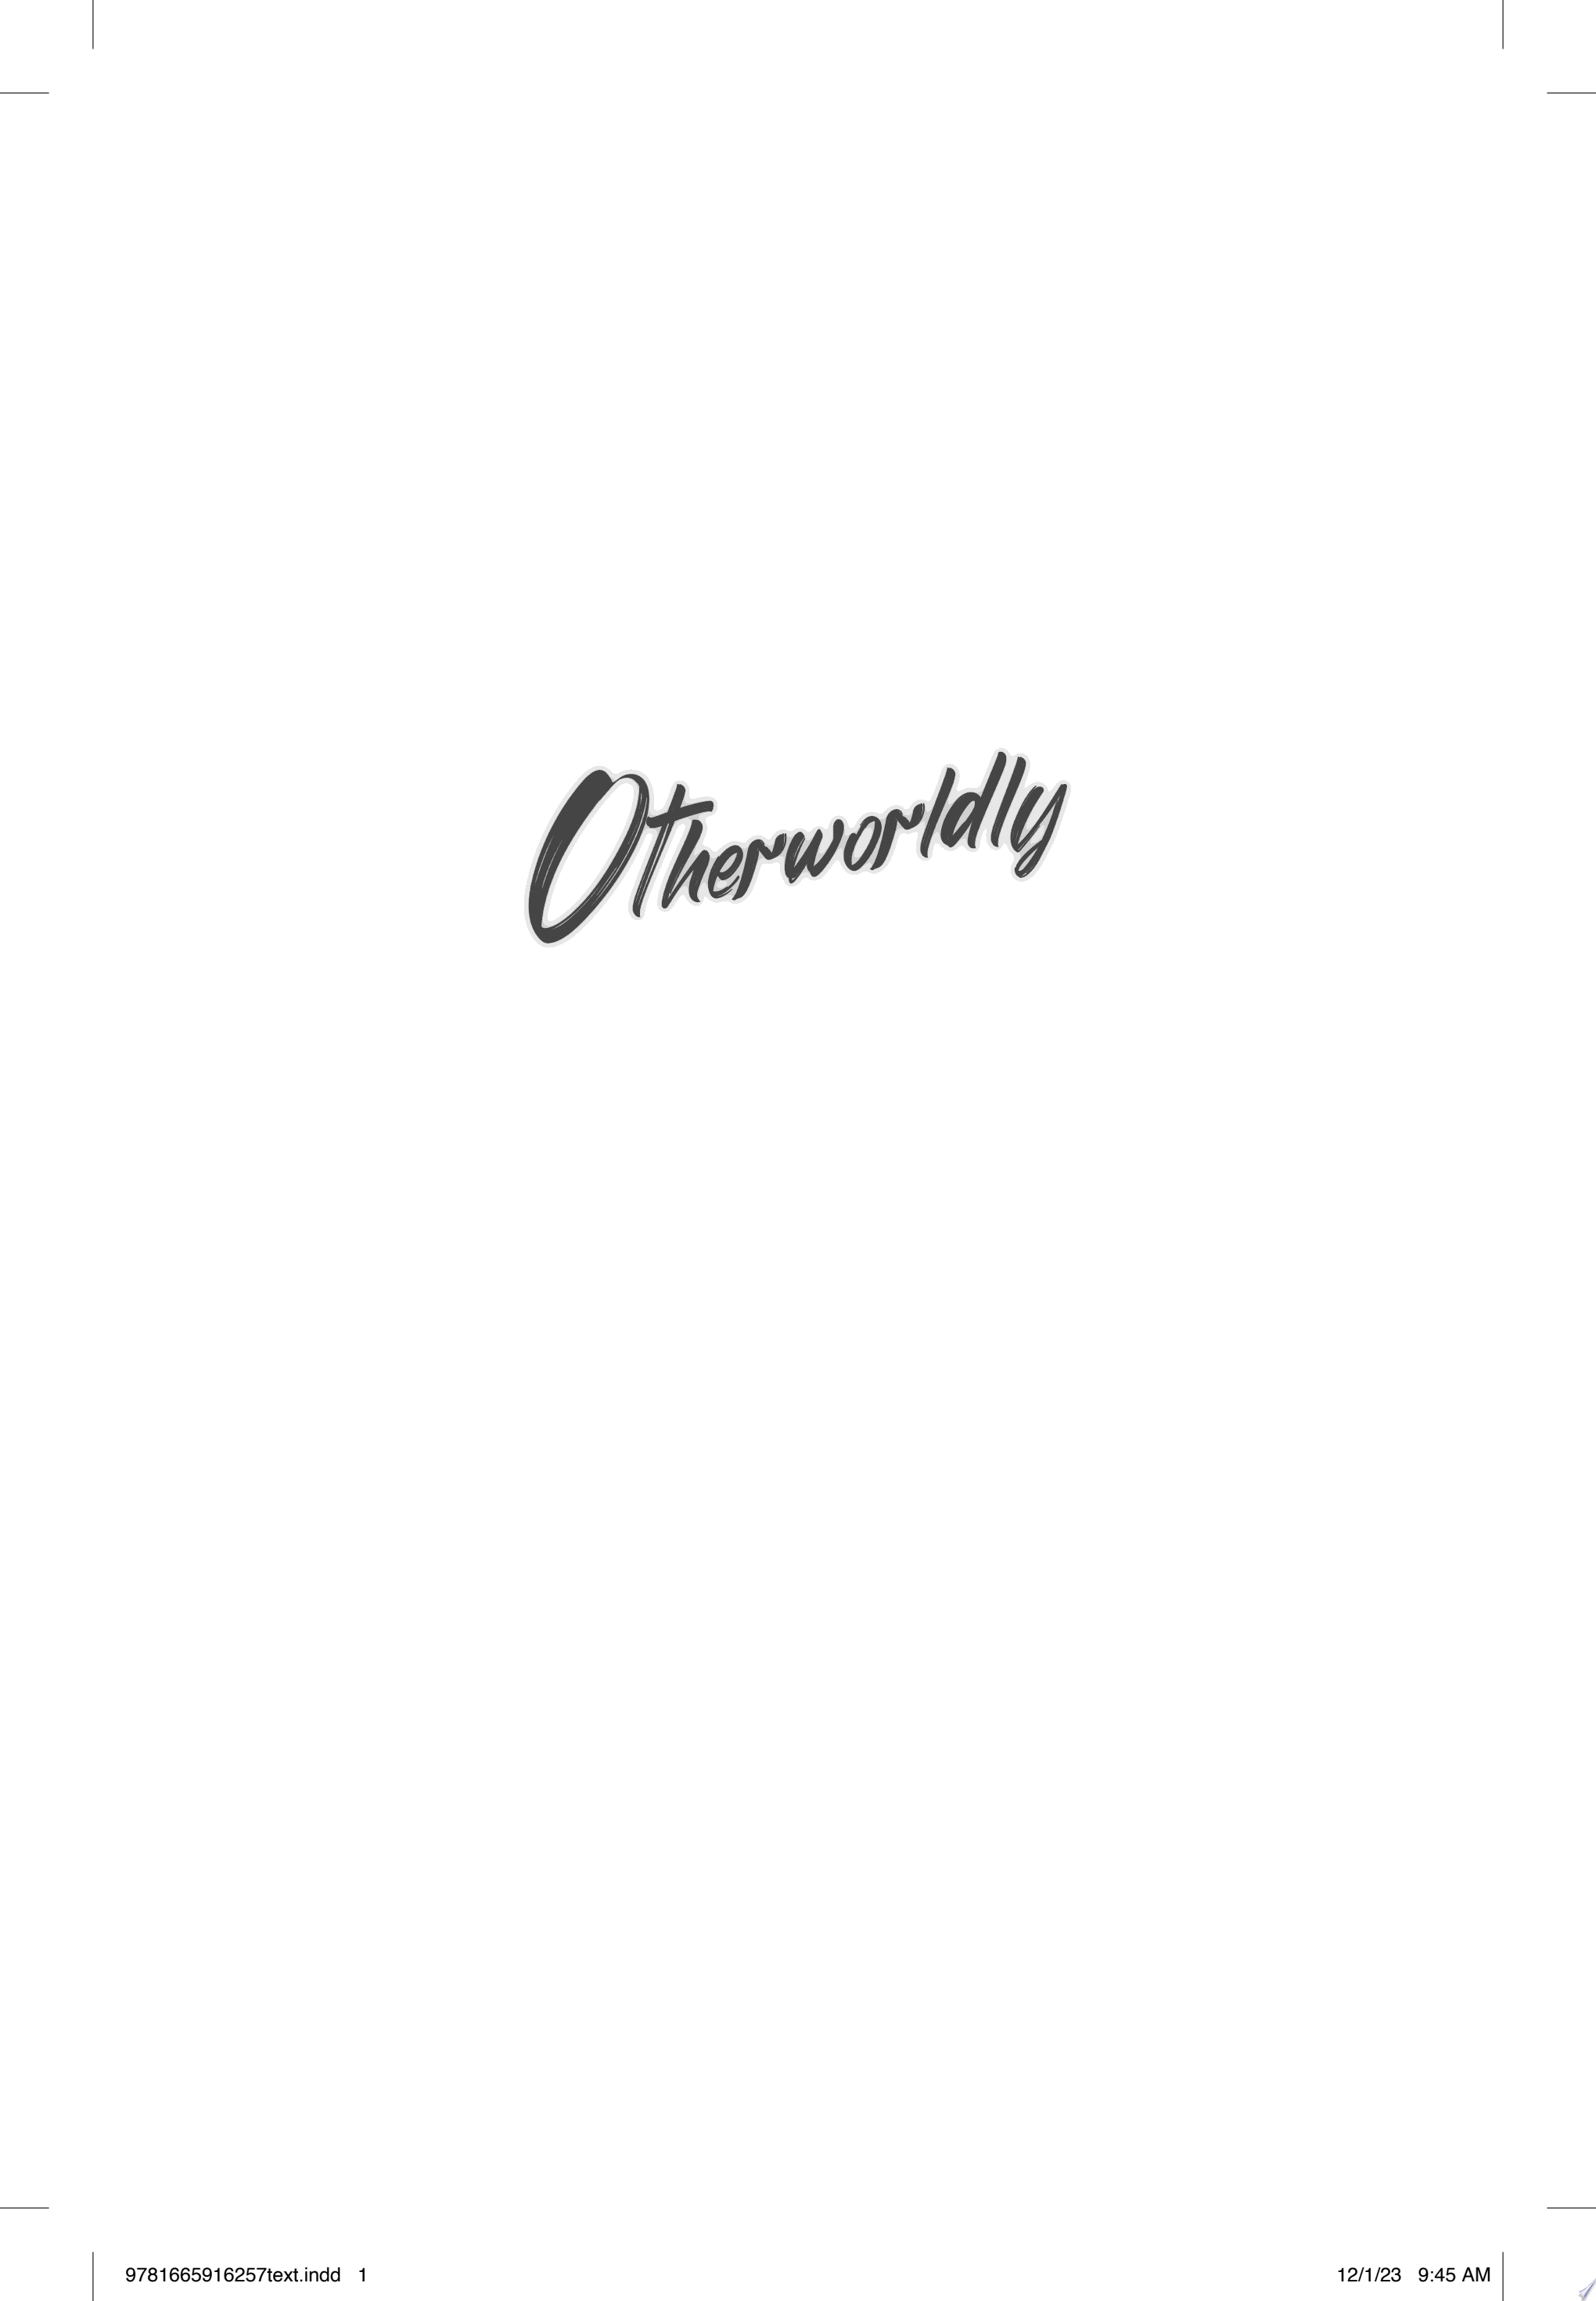 Image for "Otherworldly"